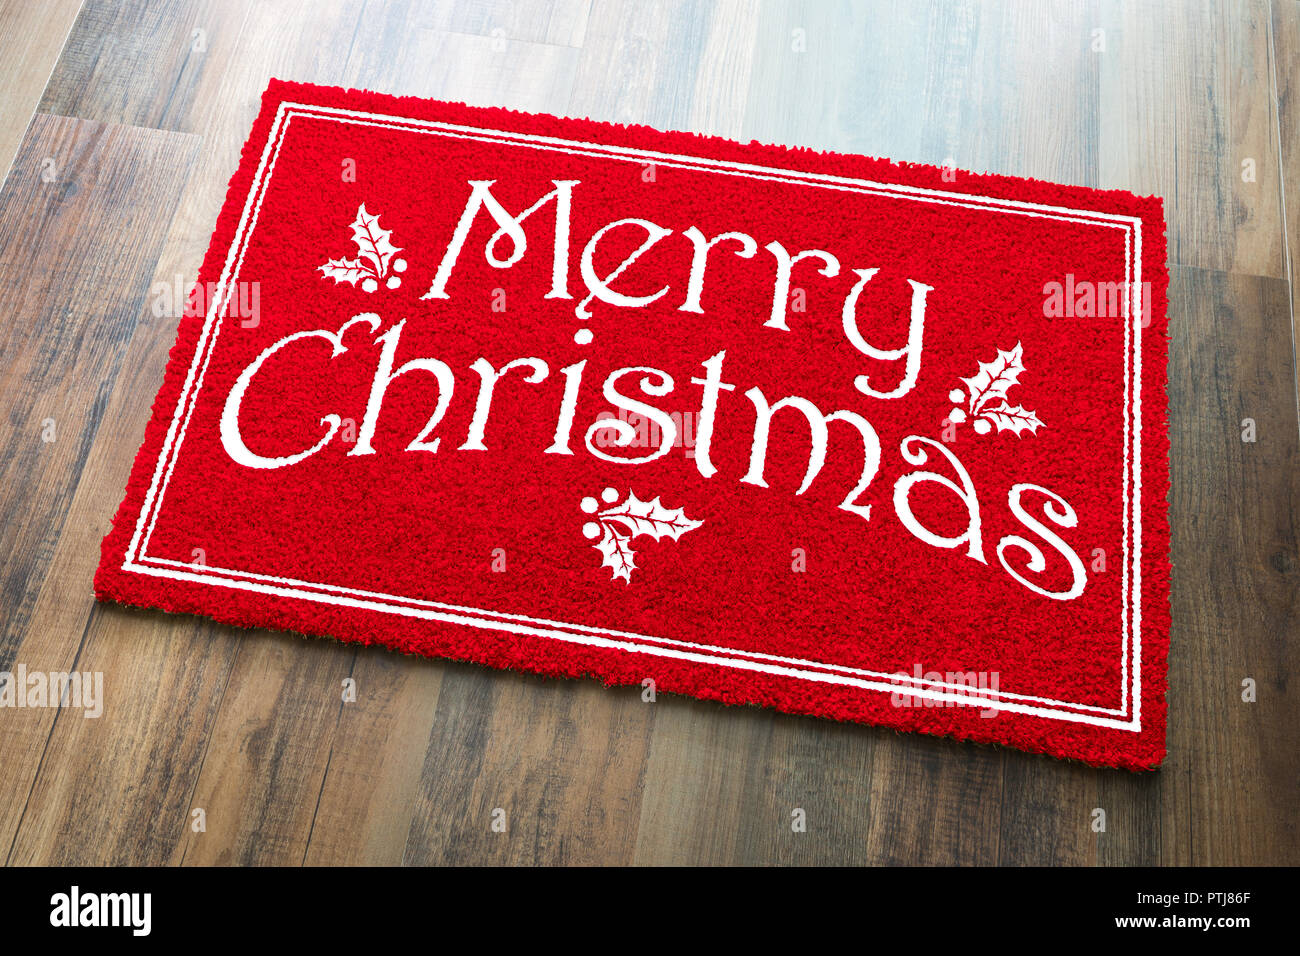 Merry Christmas Red Welcome Mat On Wood Floor Background. Stock Photo